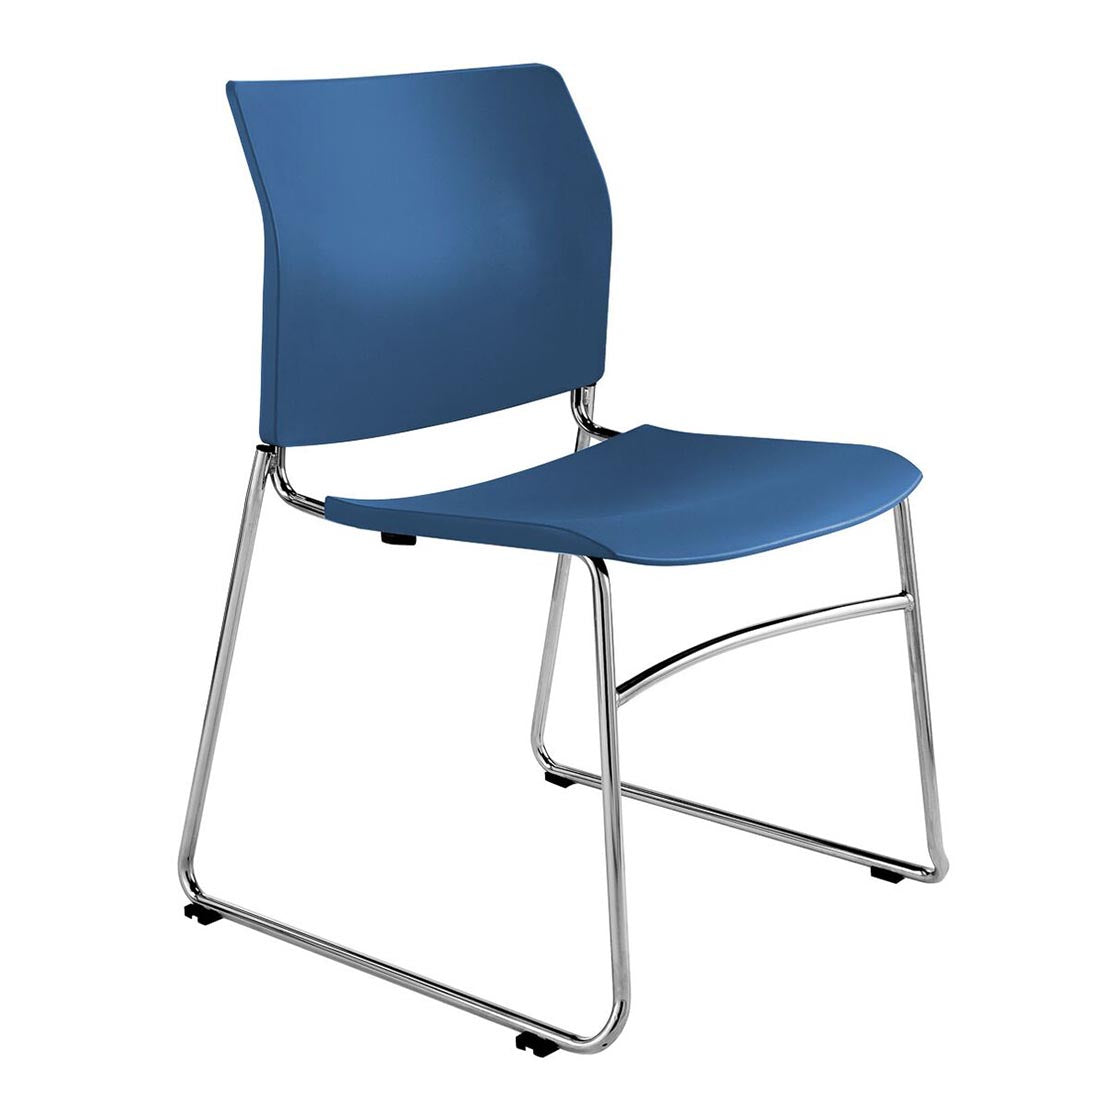 CS One Visitor Chair - switchoffice.com.au